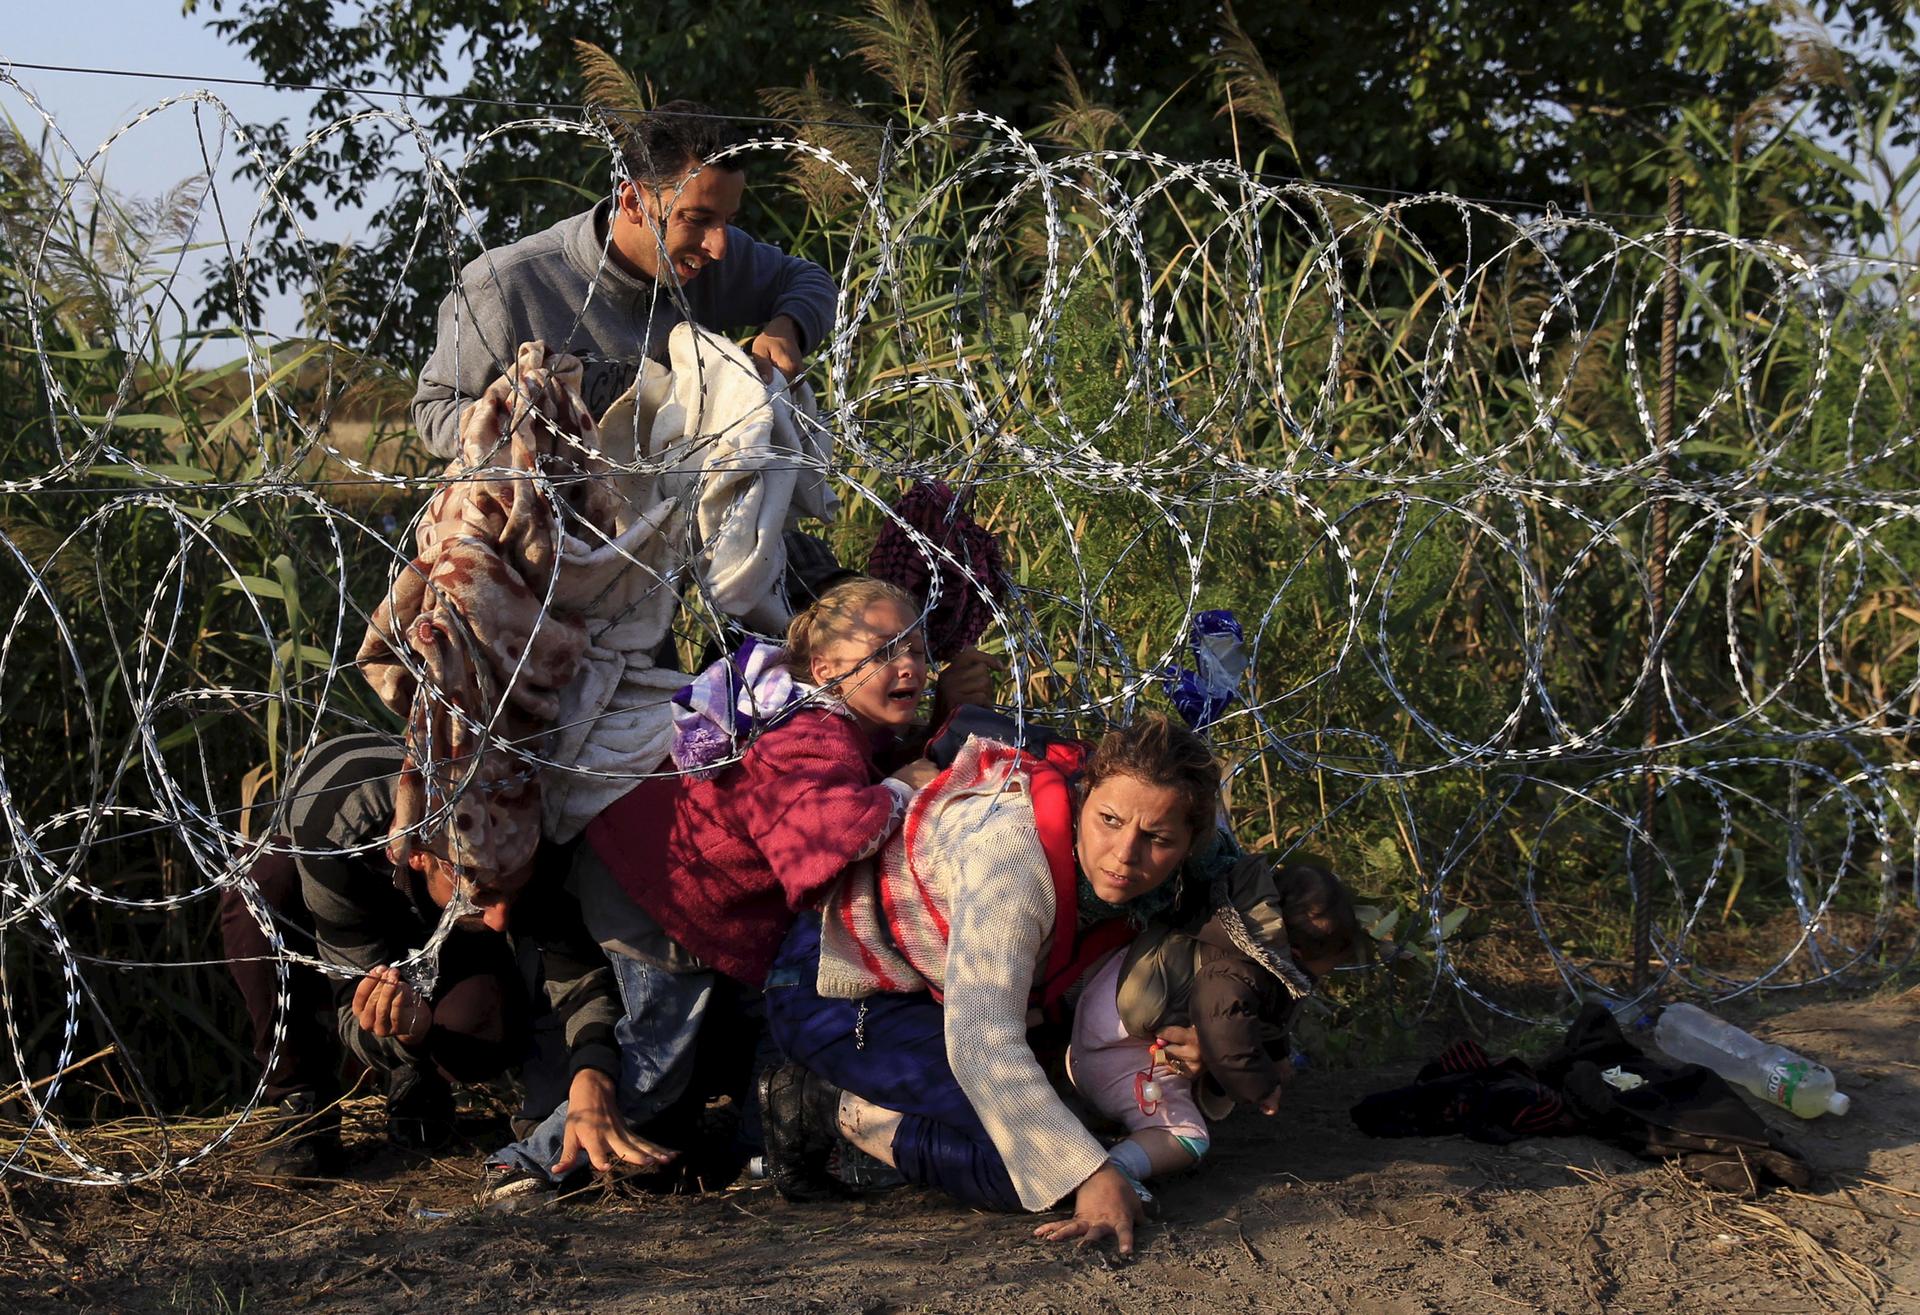 Syrian refugees cross under a fence as they enter Hungary at the border with Serbia, near Roszke, Aug. 27, 2015.